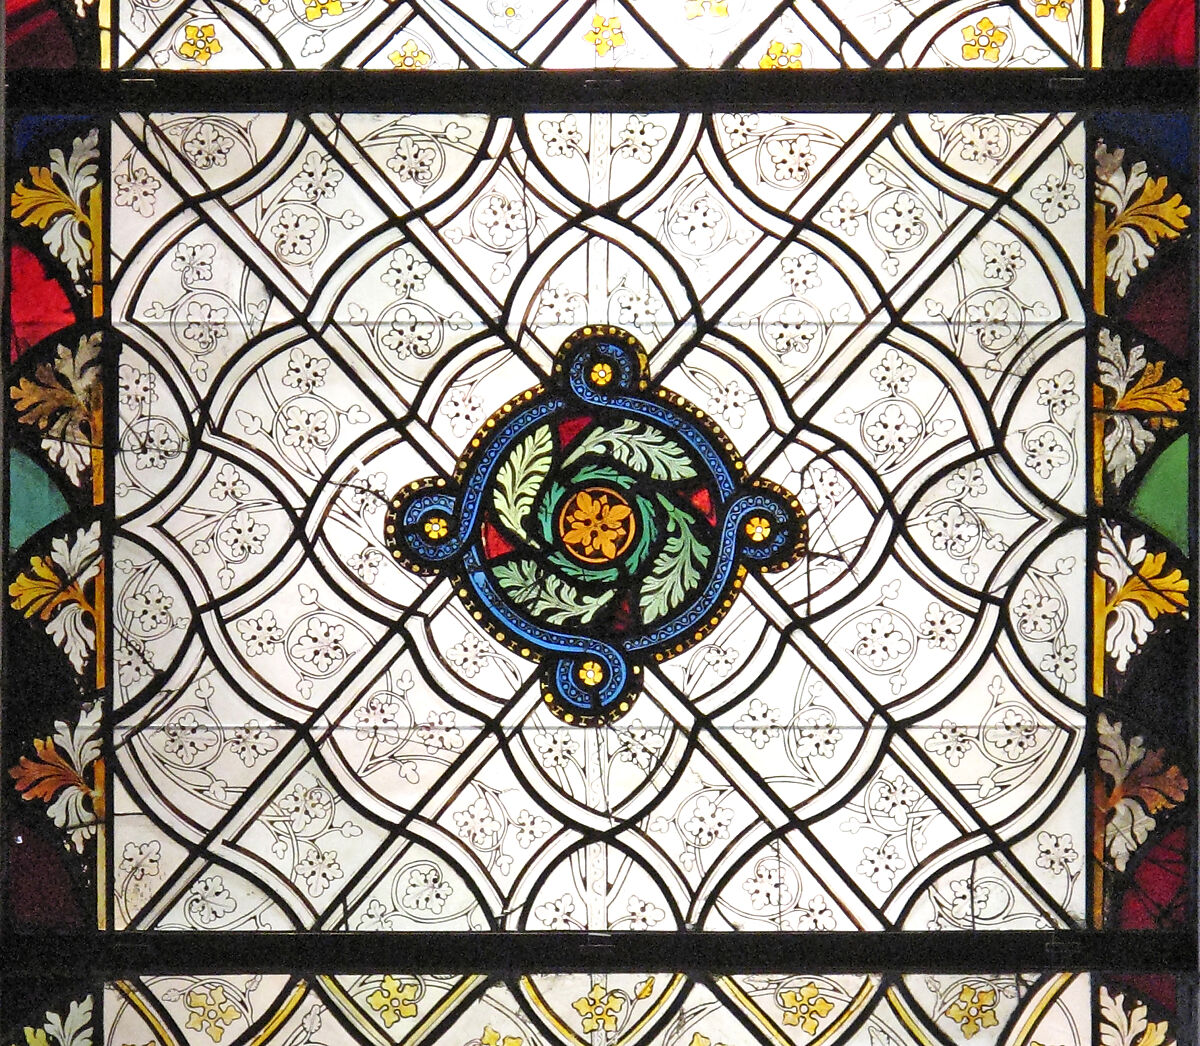 Grisaille Panel with Foliate Pattern, Pot-metal glass, colorless glass, silver stain, and vitreous paint, French 